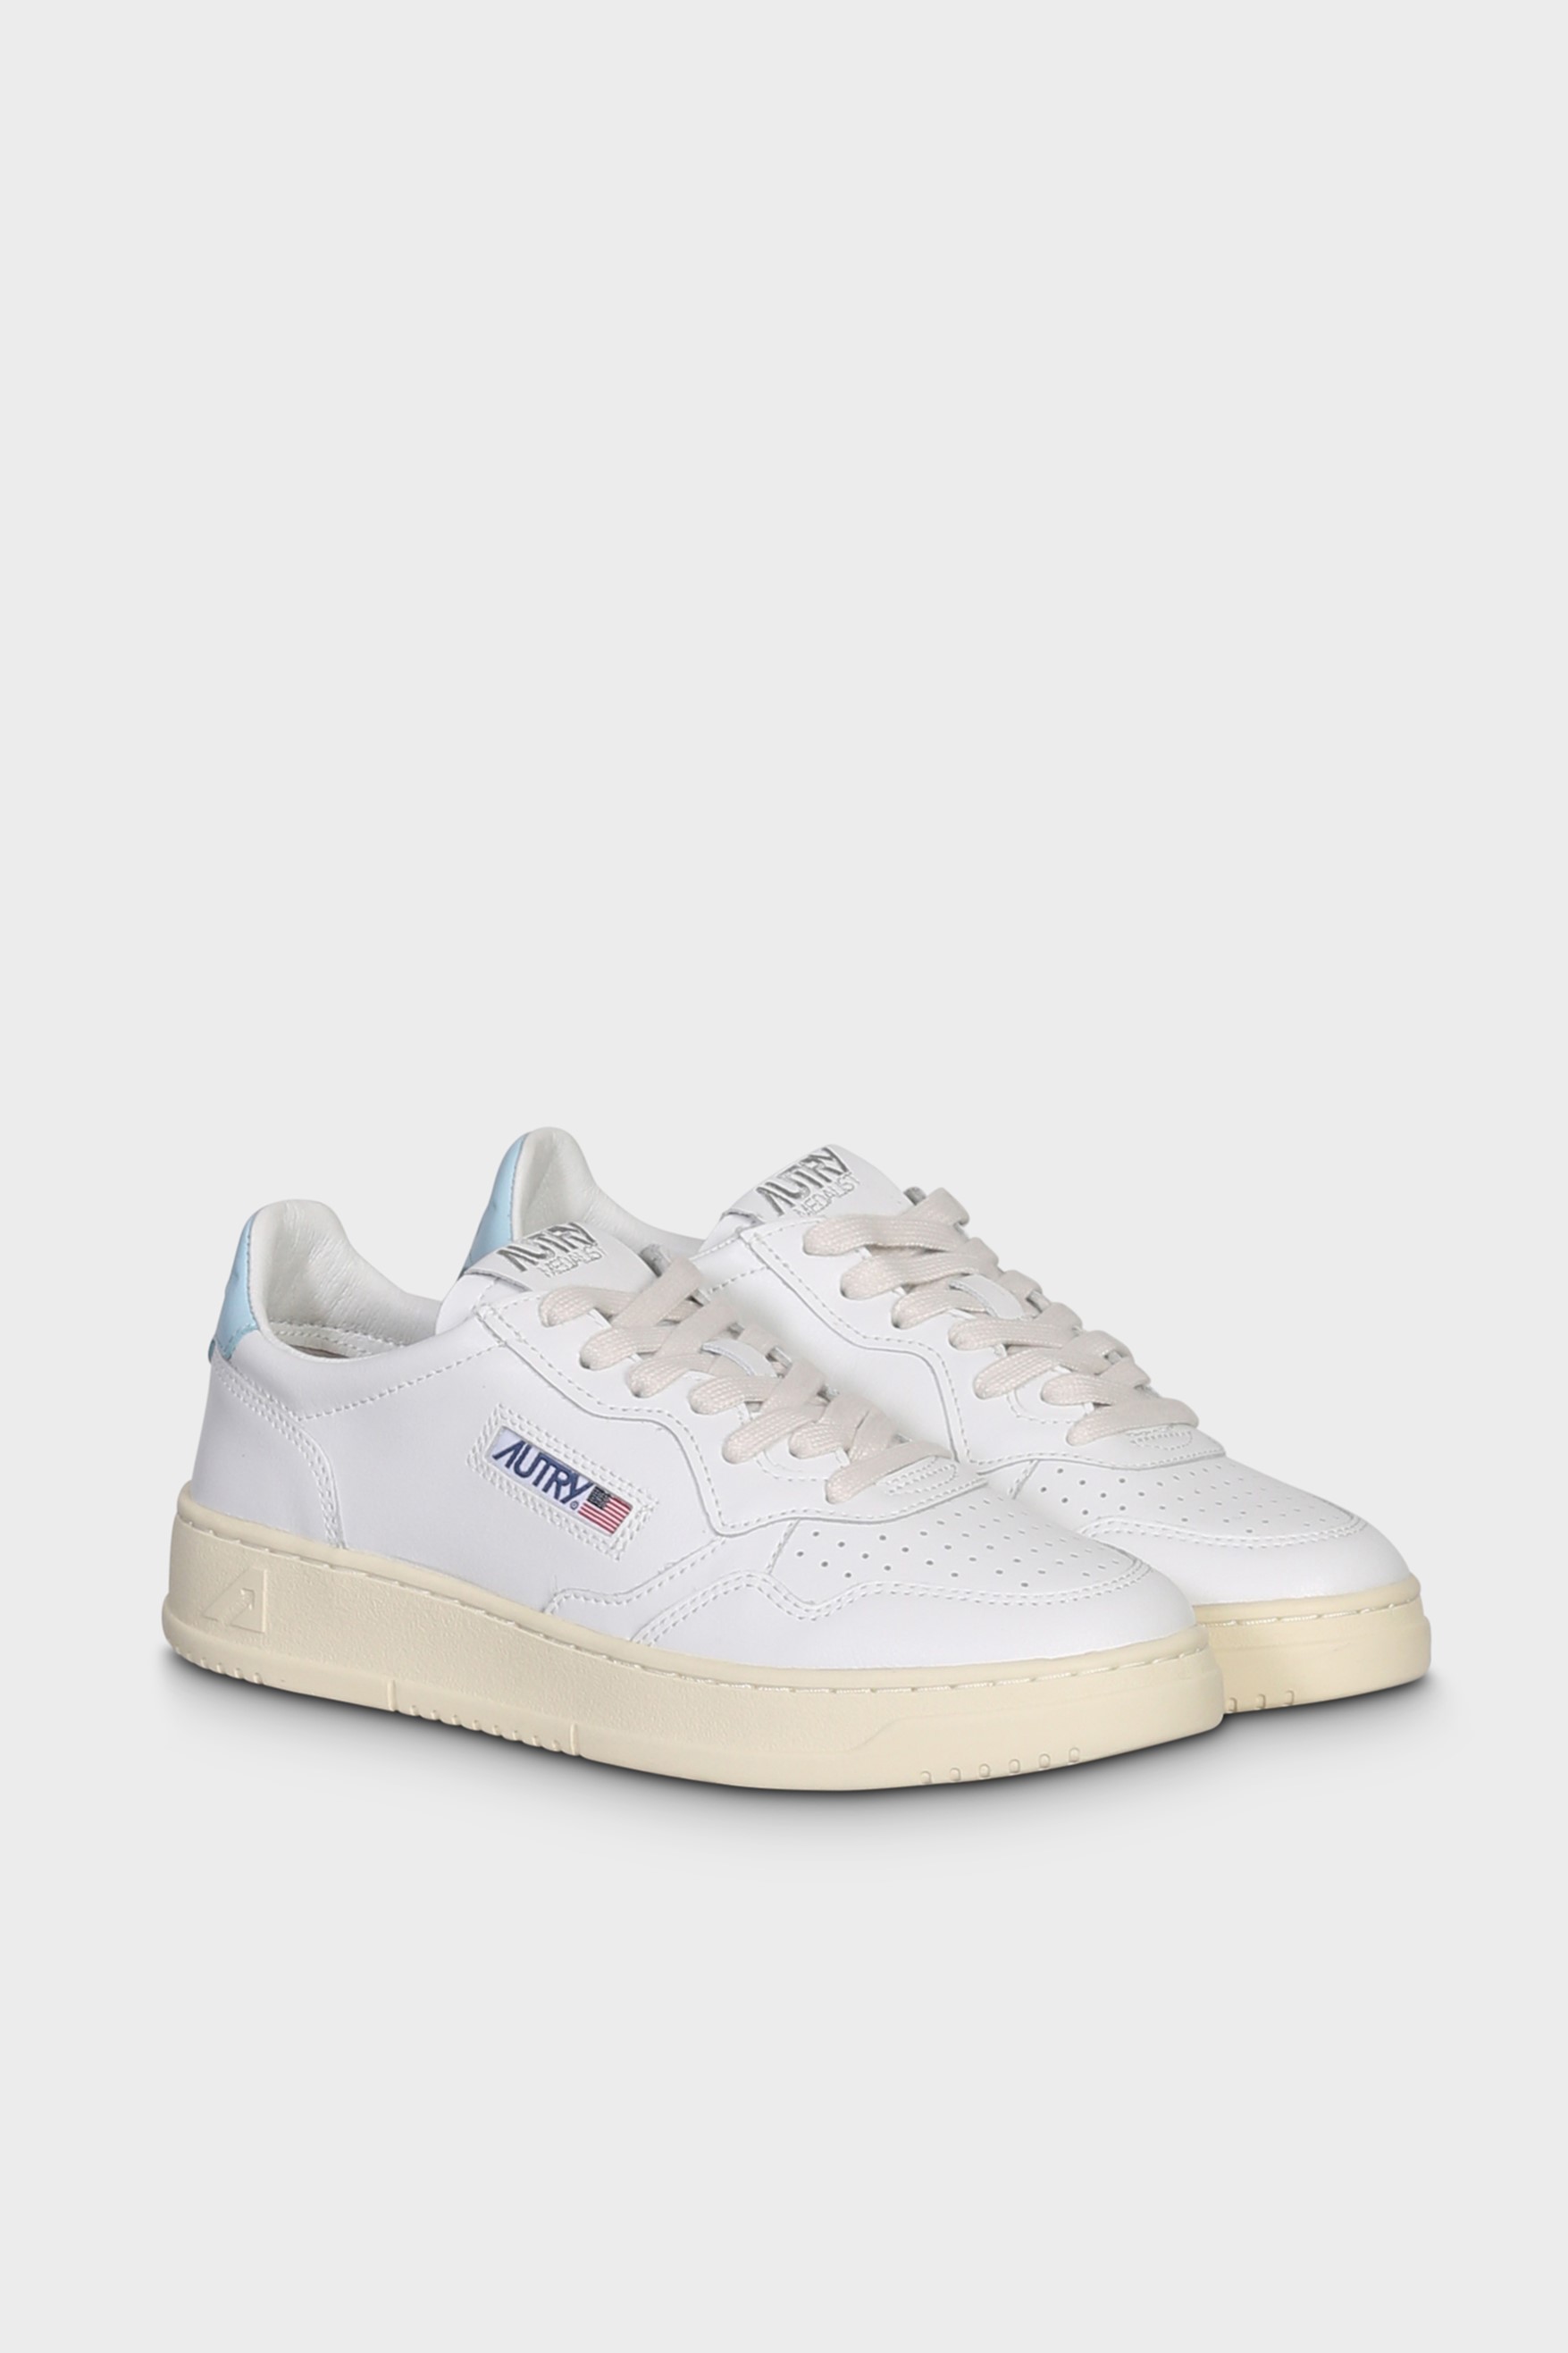 AUTRY ACTION SHOES Medalist Low Sneaker in White/Stream Blue 41